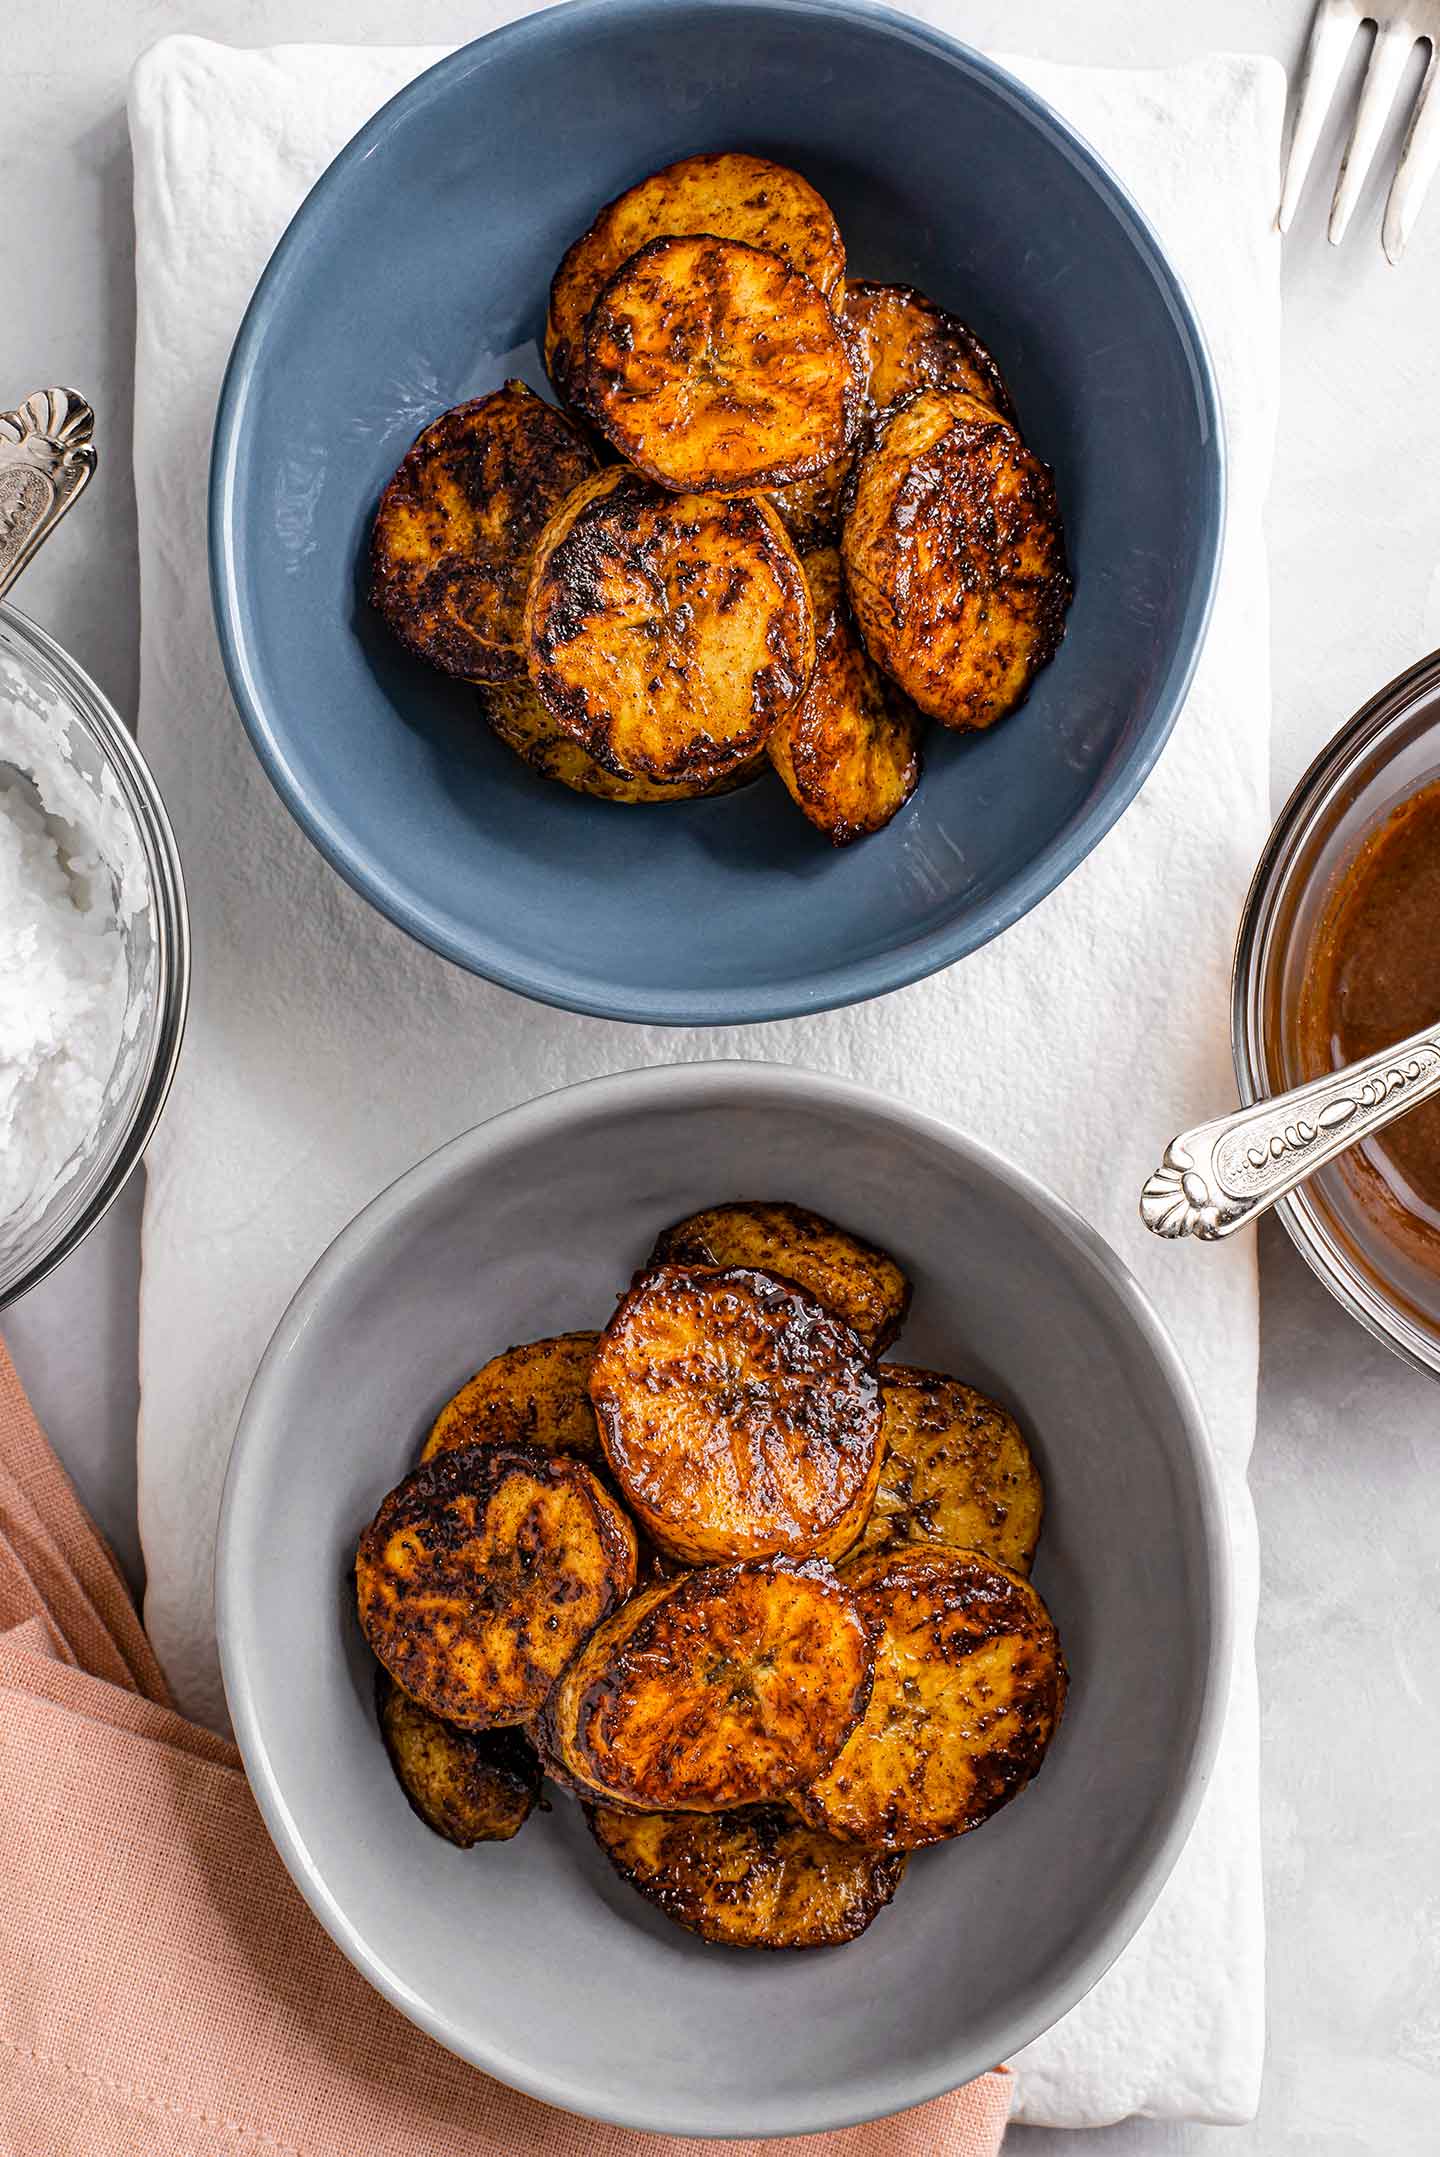 Top down view of golden caramelized plantain slices in two small bowls. The slices are golden and blackened around the edges.